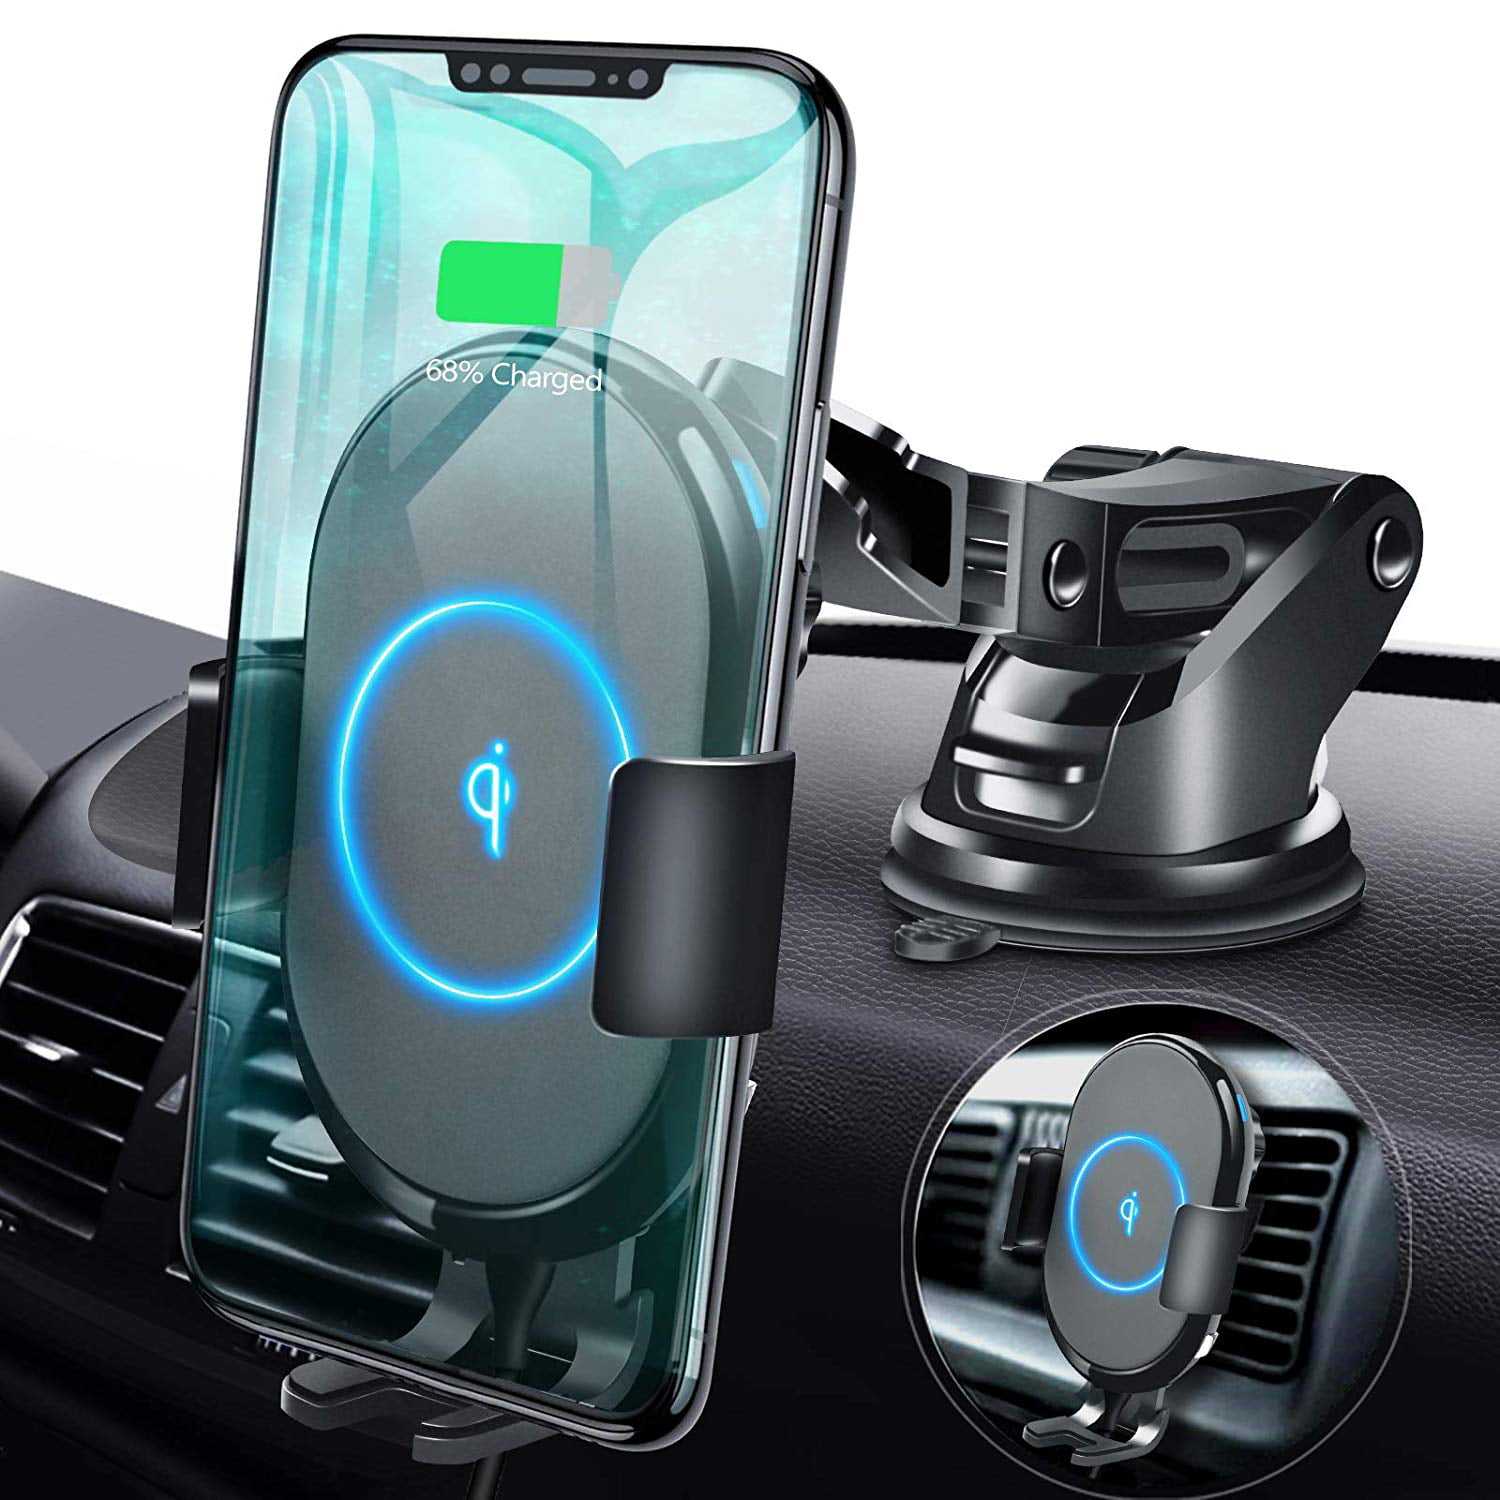 5W Auto Clamping Phone Holder for Dashboard Windshield Compatible with iPhone Xs Max/XS/XR/8 Plus Samsung Galaxy S10/S9/S8/S7 Edge/Note5 & Other Qi Smartphone Vech Wireless Car Charger Mount